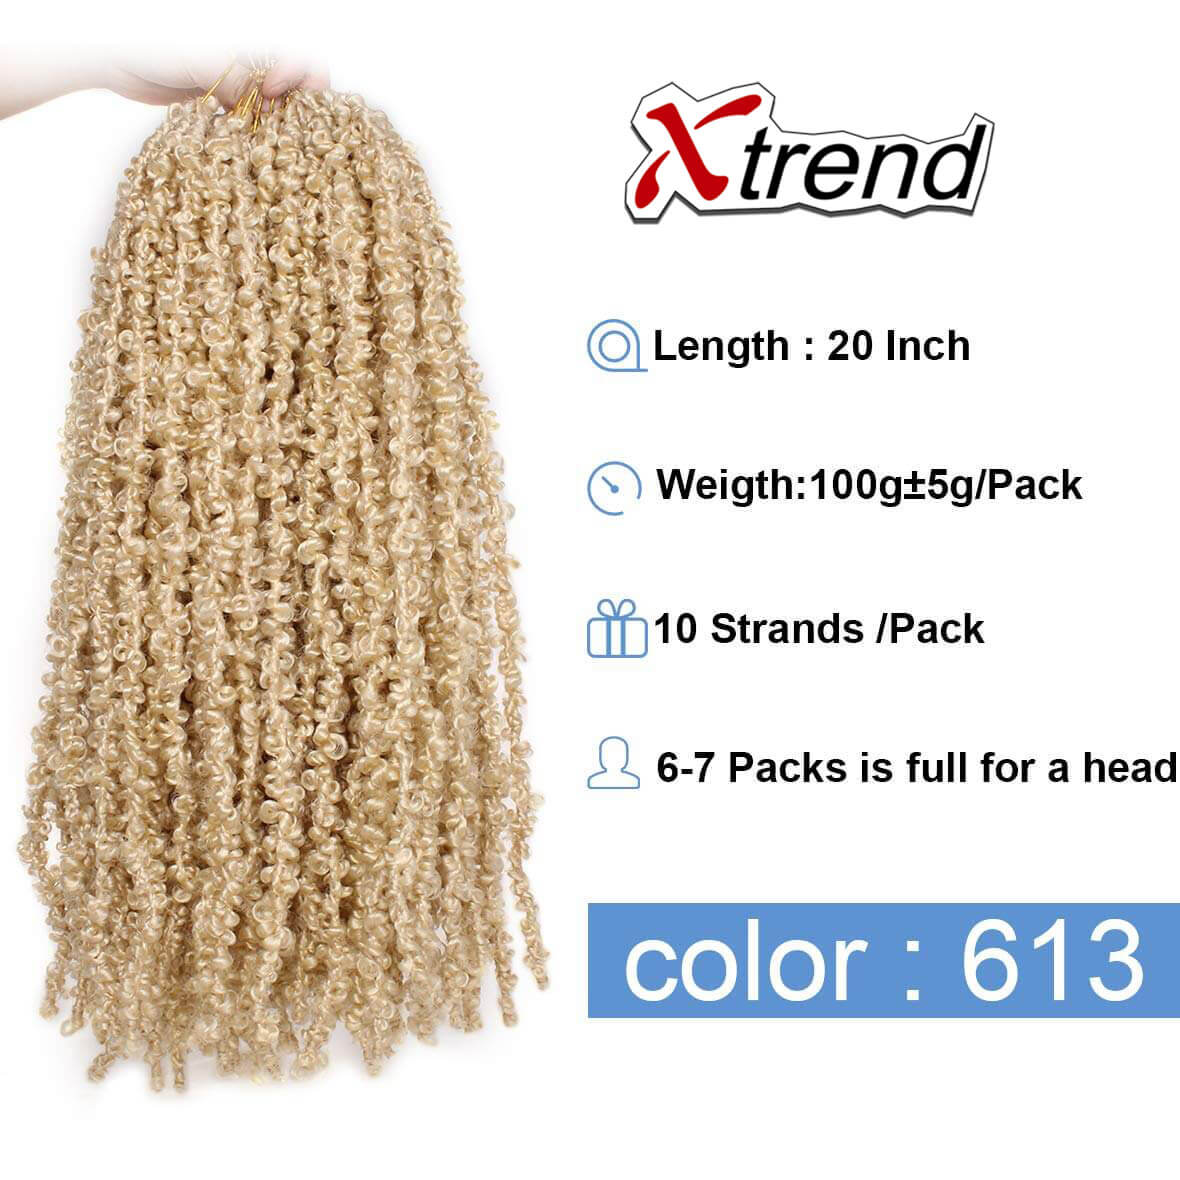 Xtrend Butterfly Locs 20 Inch Distressed Faux Locs Pre-looped Synthetic Crochet Braids Extended Soft Locs Extensions